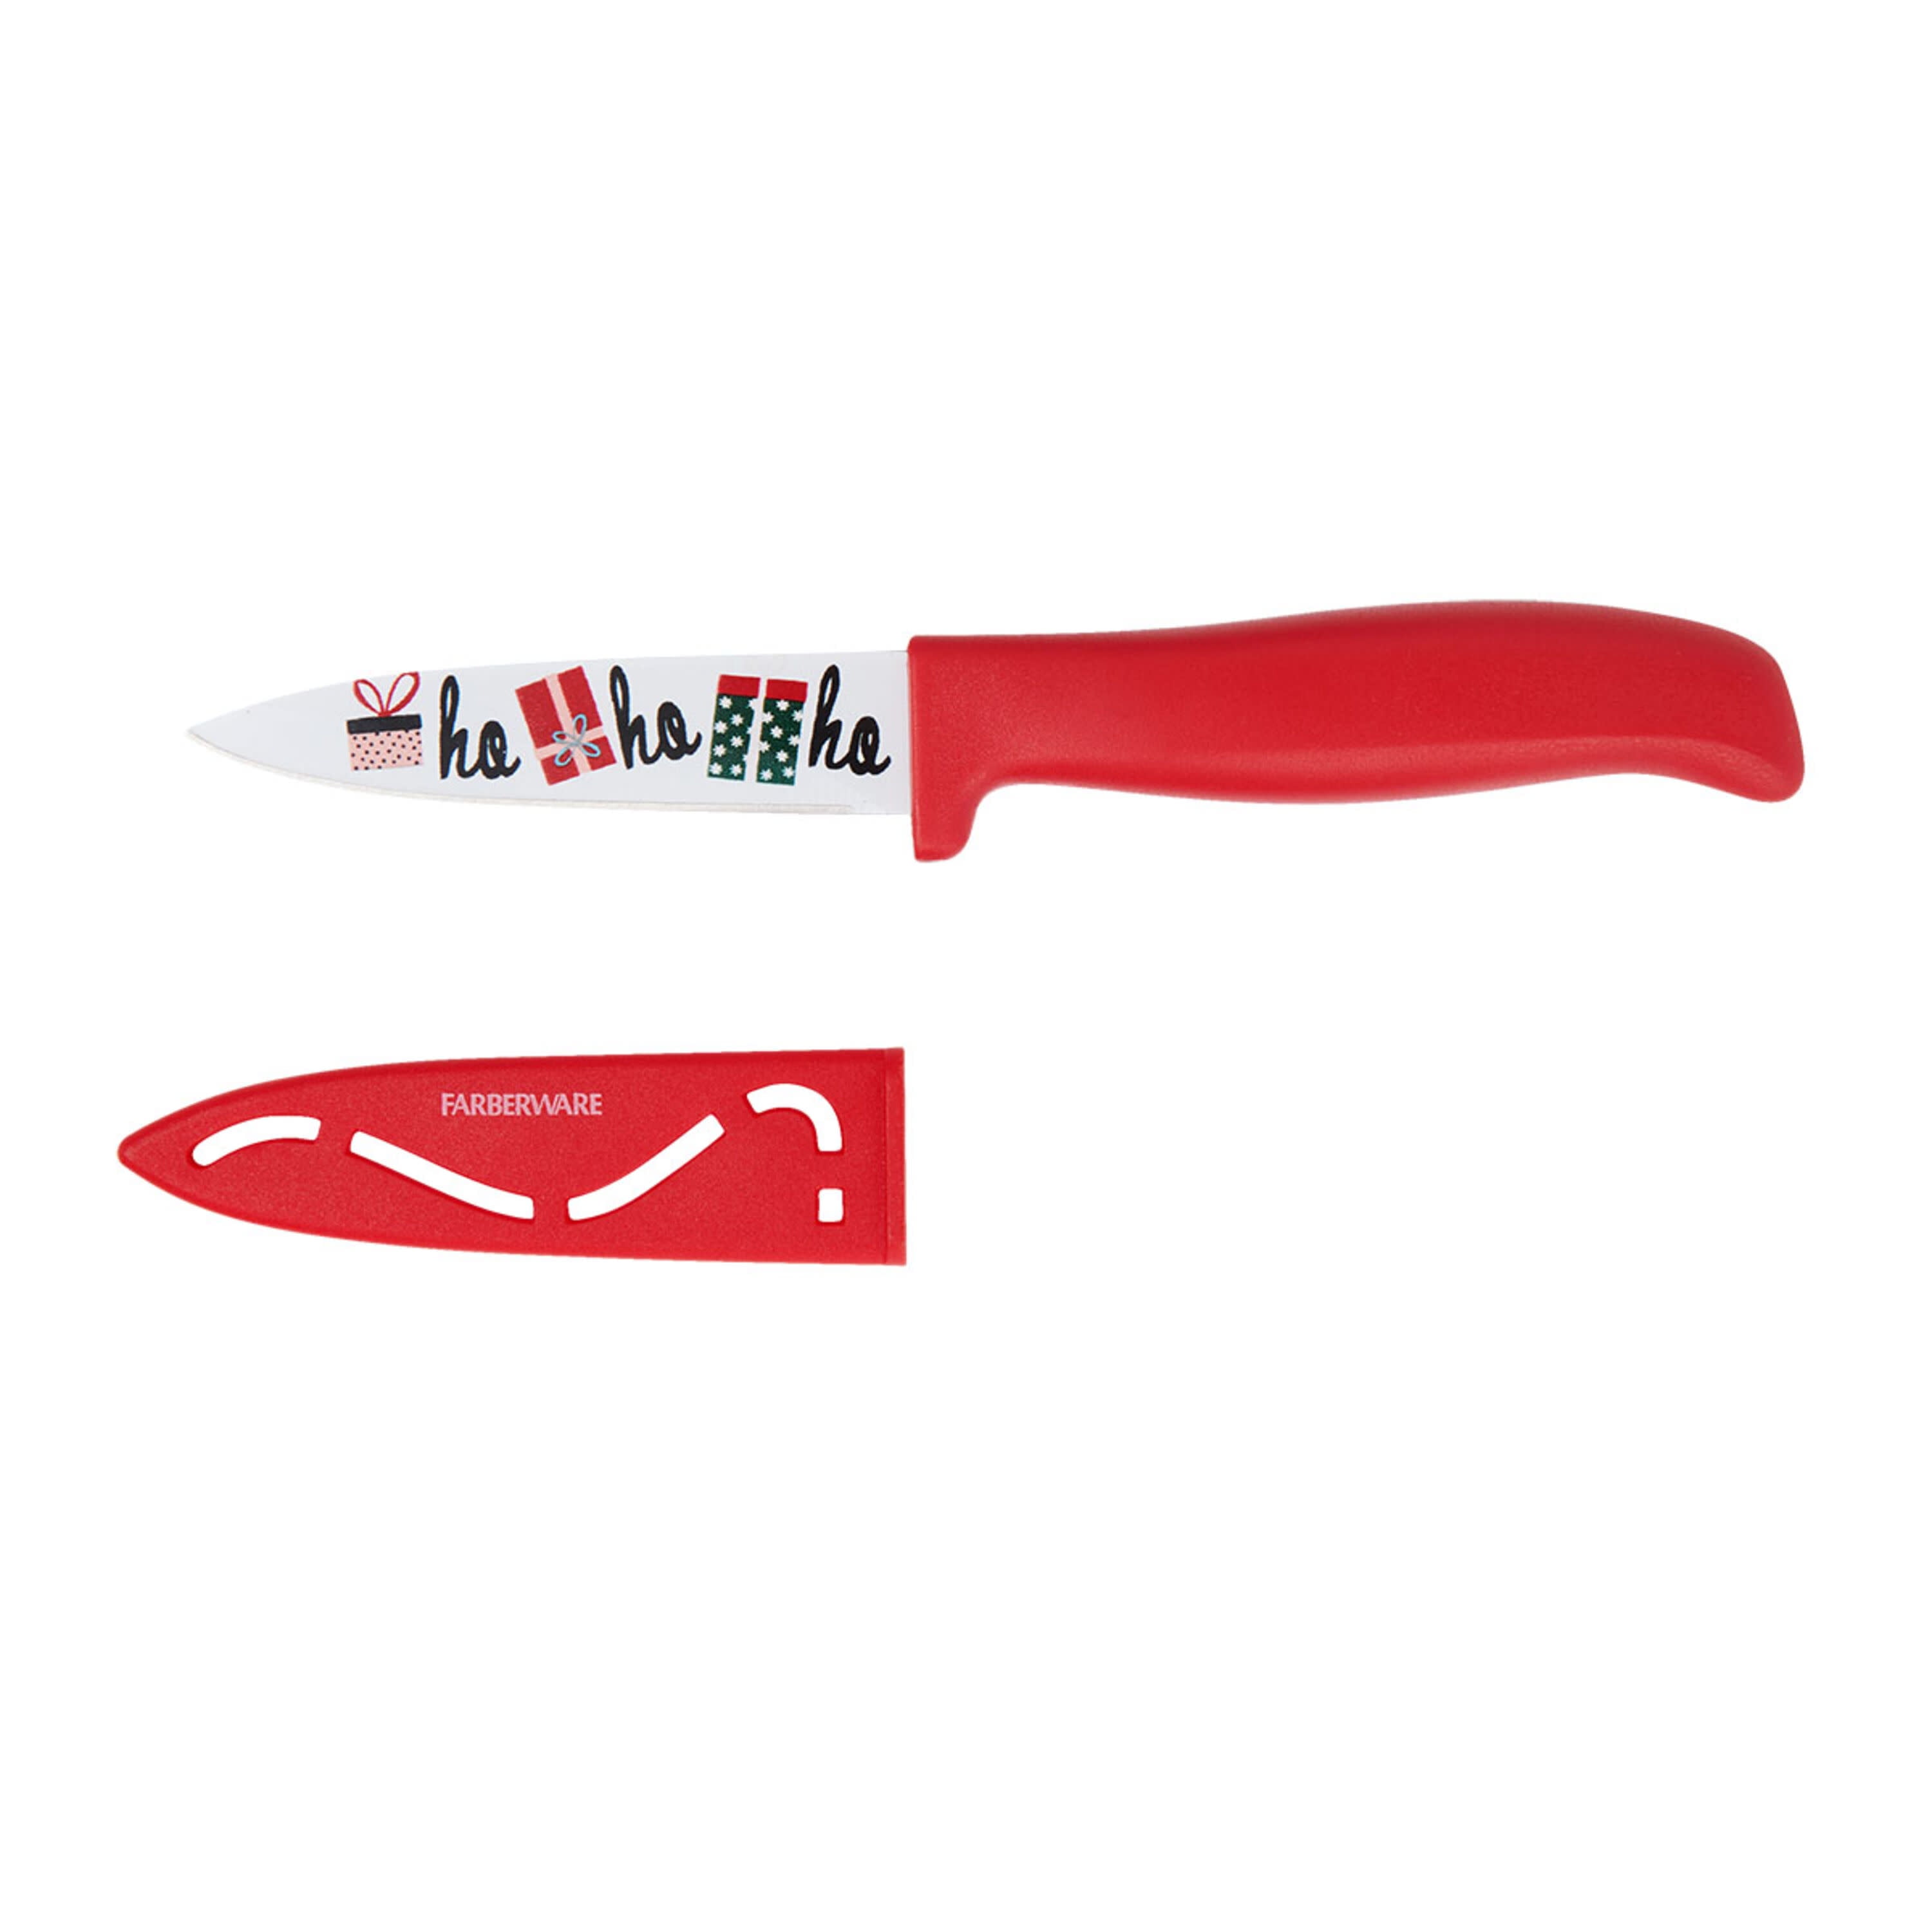 Farberware 3.5 Gingerbread Resin Paring Knife with Blade Cover